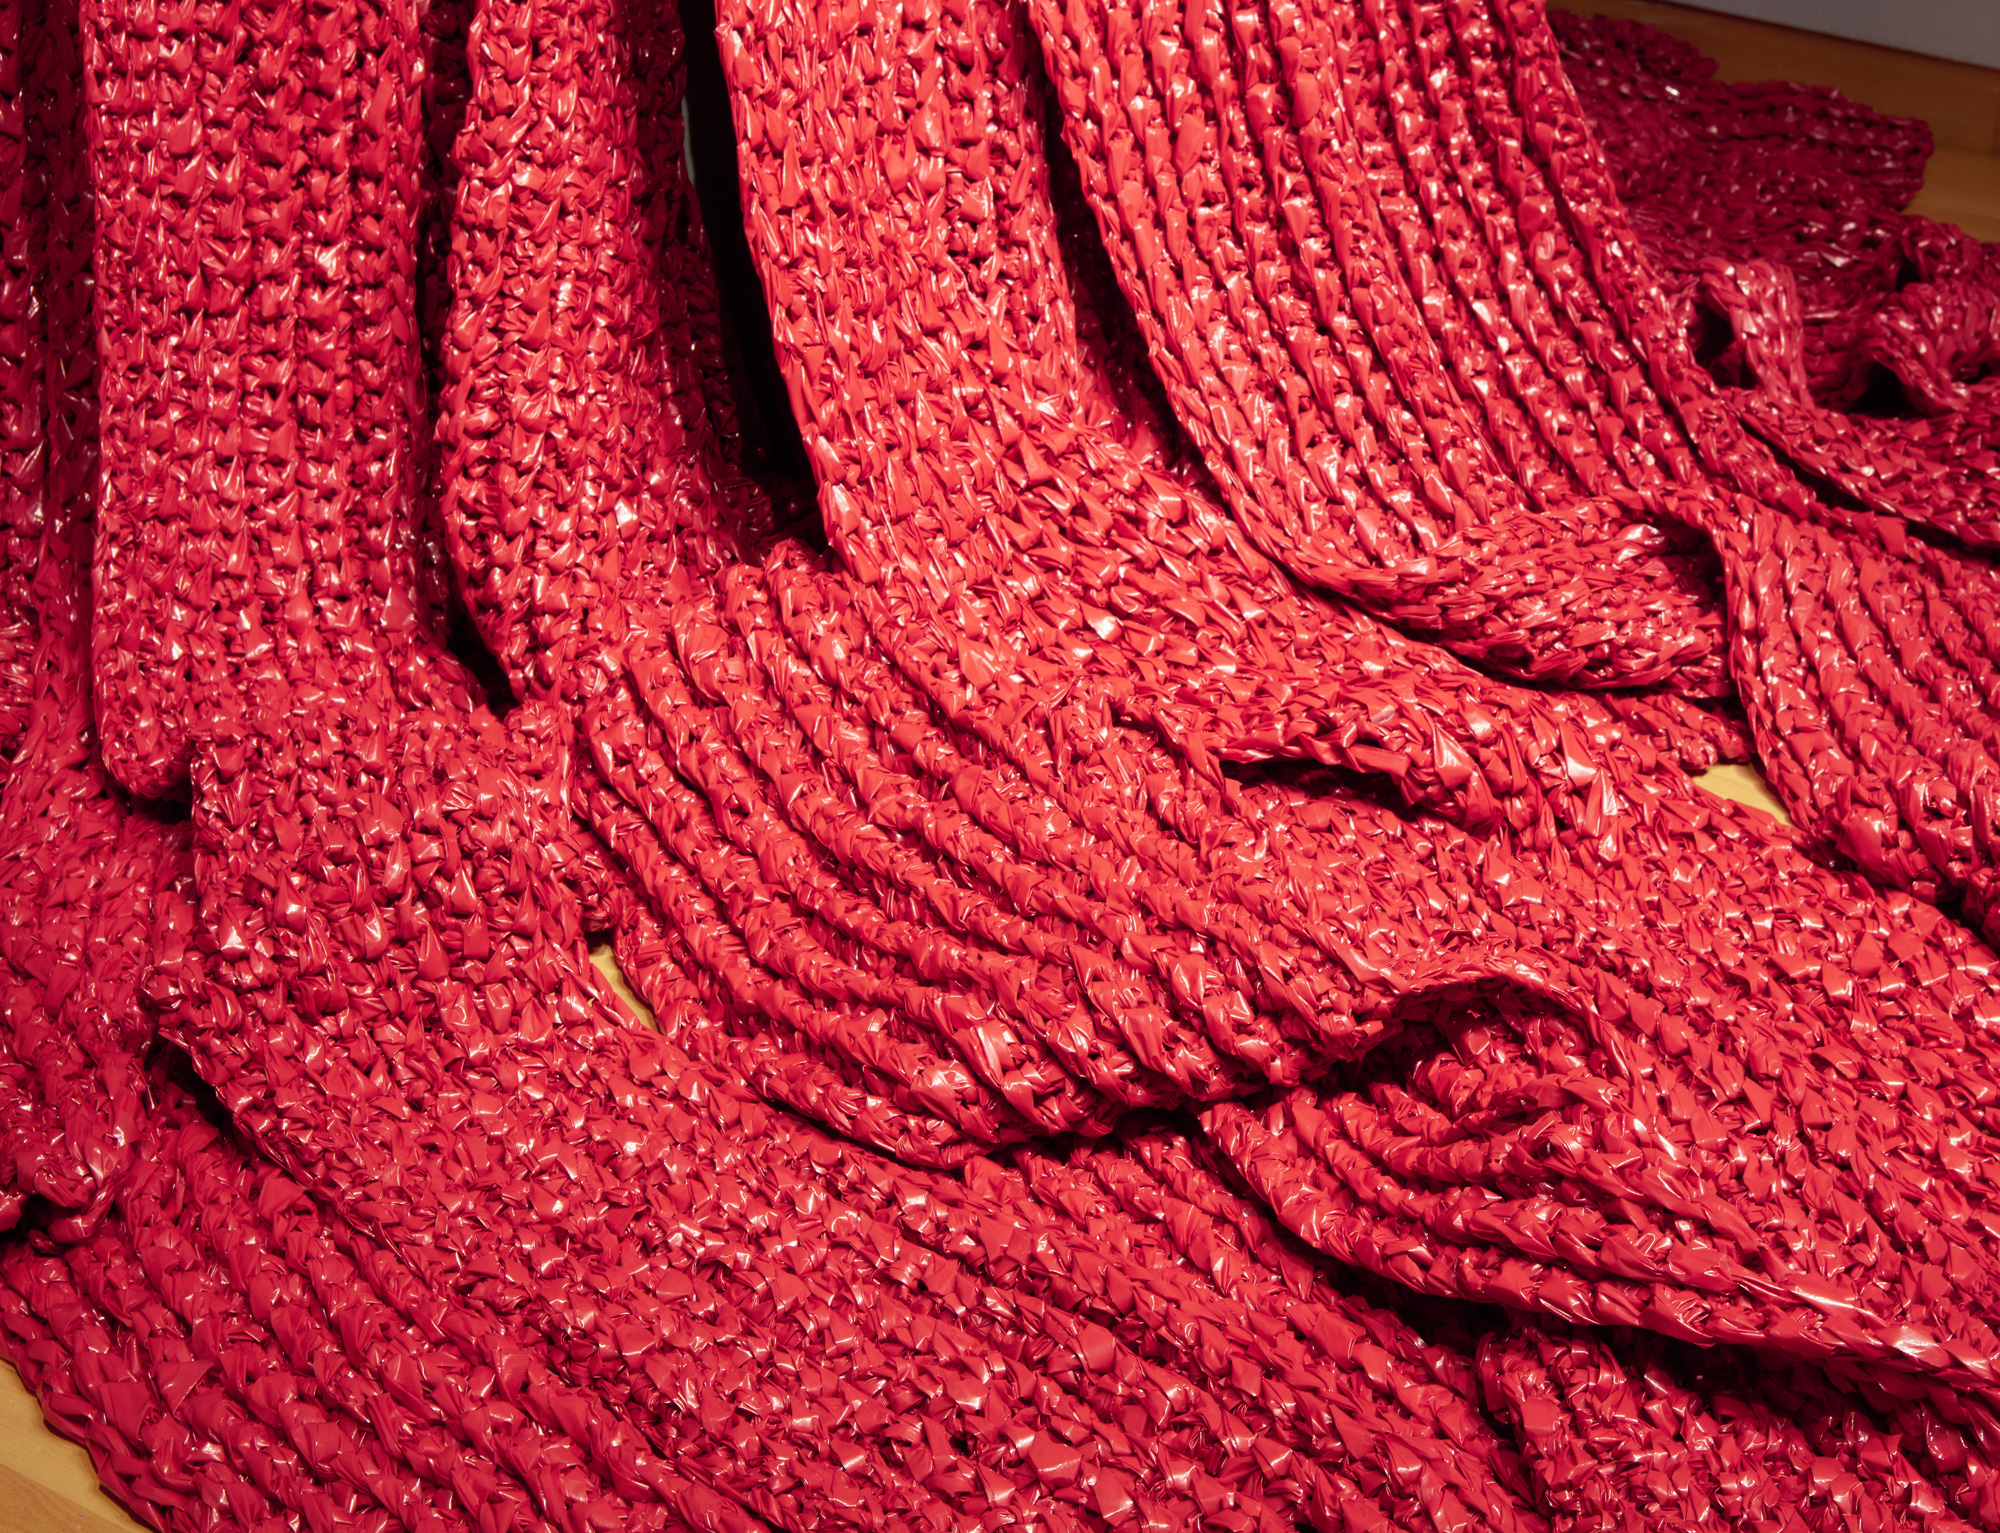 Akiko Kotani, Red Falls (detail), 2021. crocheted polyethylene, dimensions variable. Courtesy of the artist. Installation view of Skyway 20/21 exhibition at USF Contemporary Art Museum. Photo: Will Lytch.